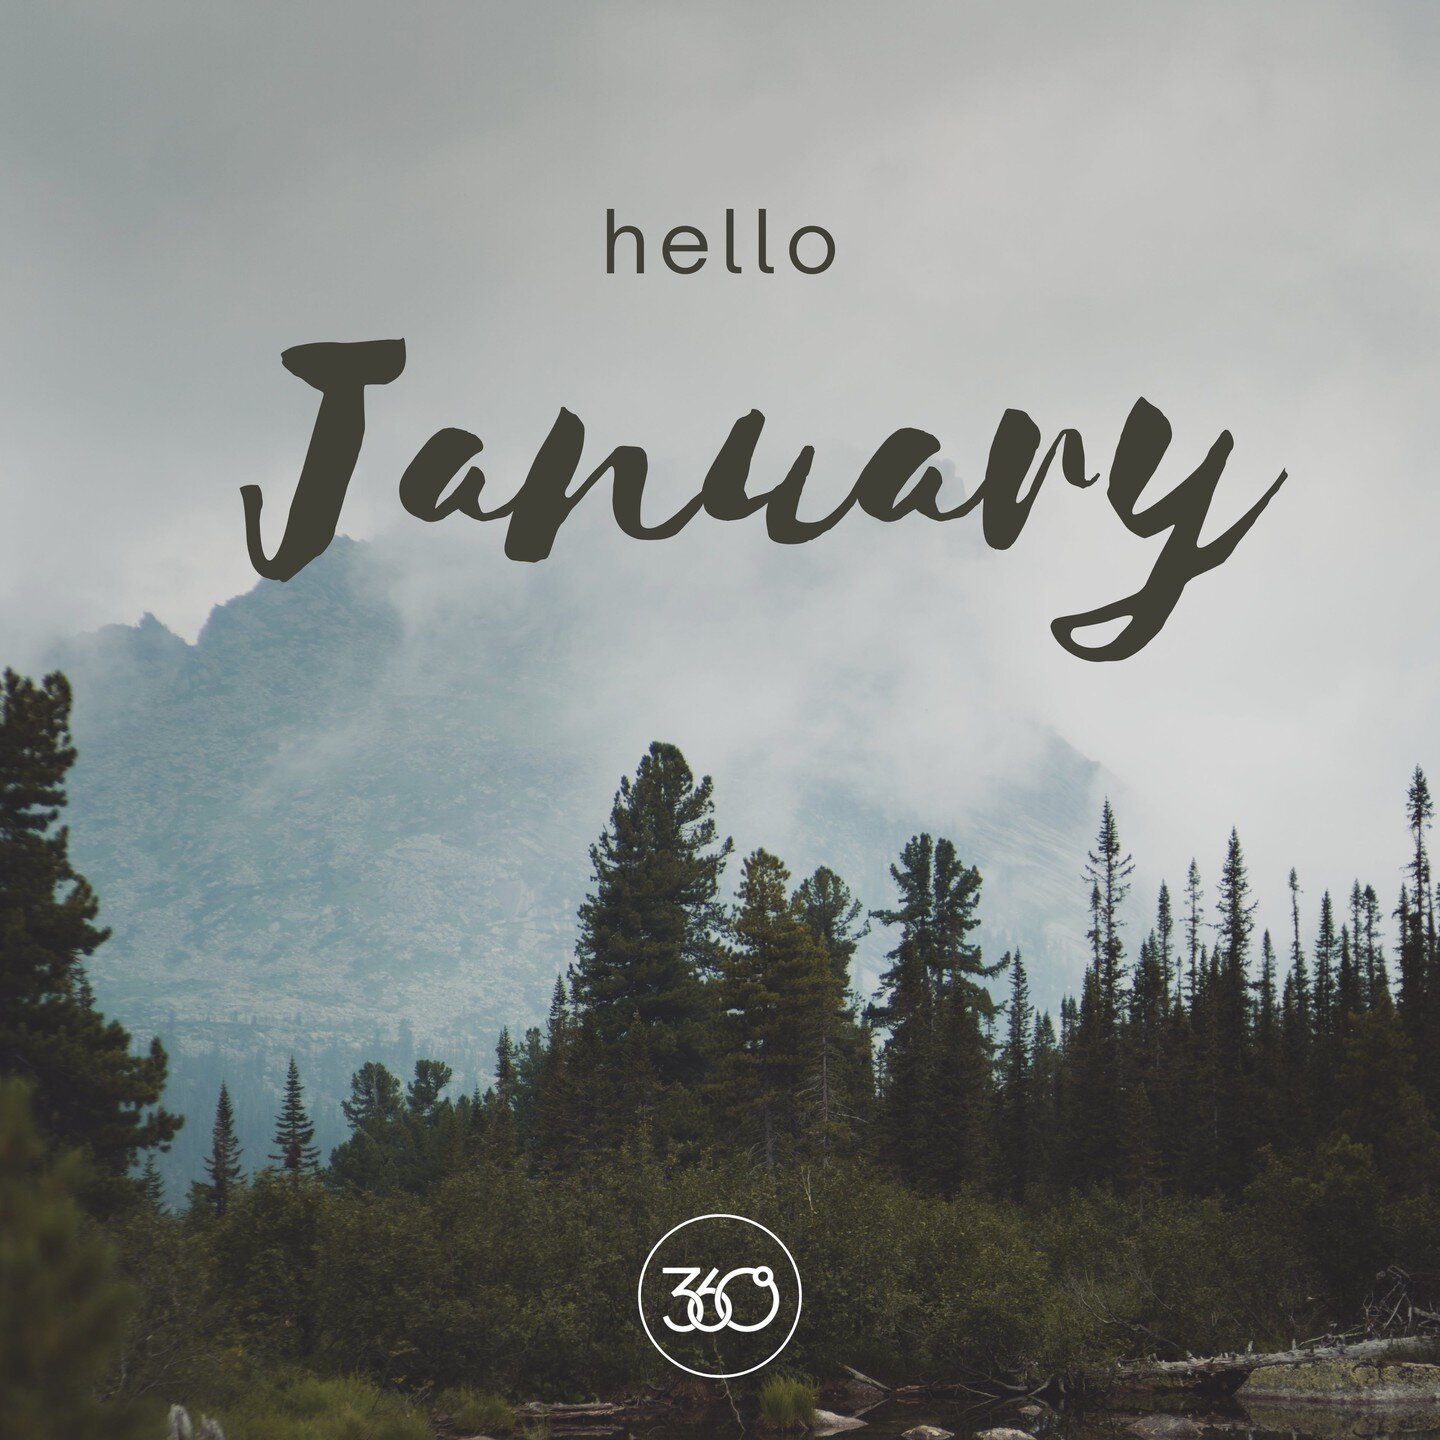 Hello January! As nature awakens with the promise of a fresh start, Concept 360 welcomes you to the new year with open arms (and open hearts for the planet). ✨

This year, let's set intentions rooted in the earth's wisdom. Hike a mountain, plant a tr